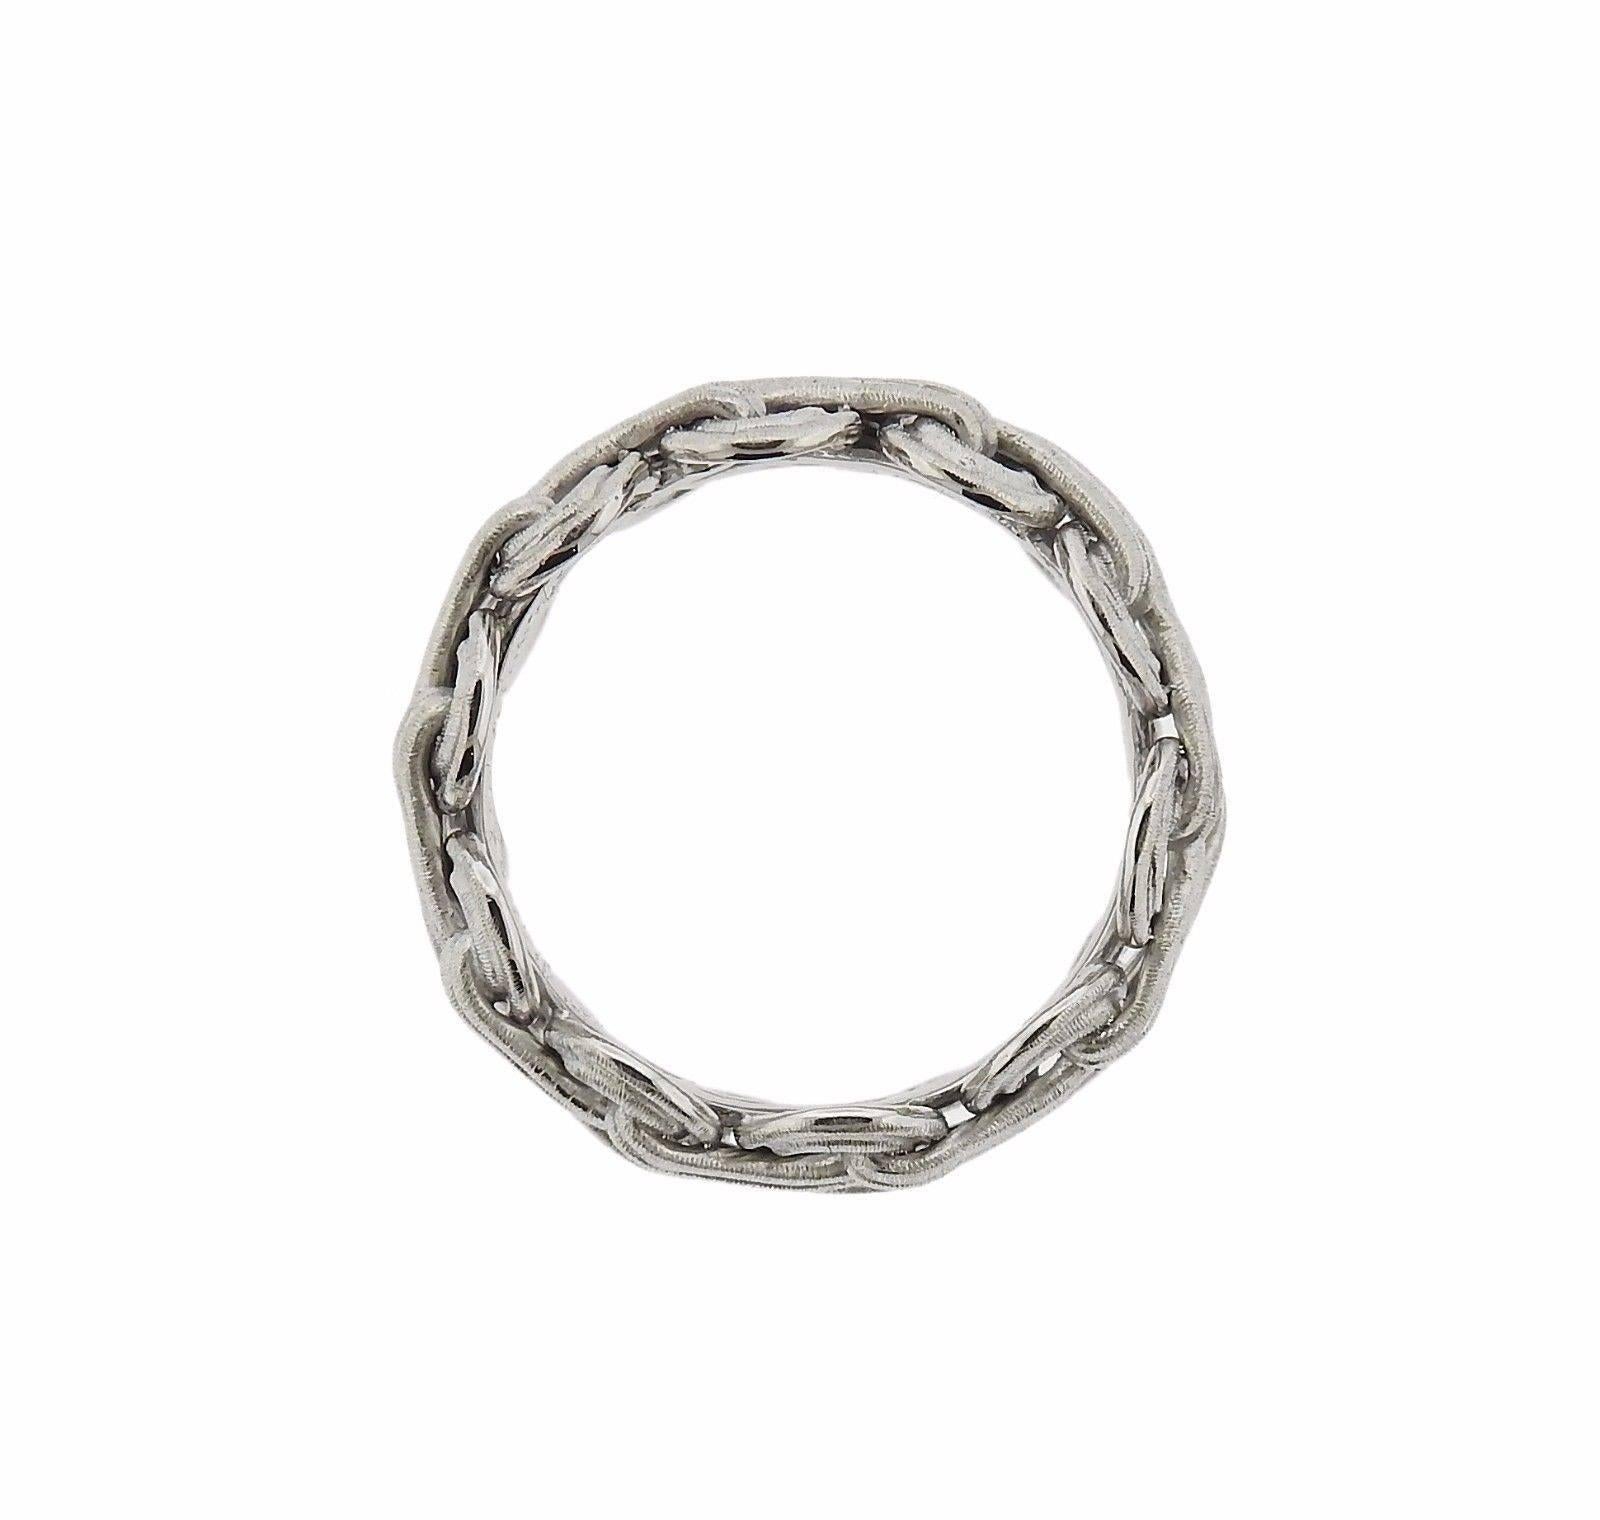 An 18k white gold band ring by Gianmaria Buccellati.  The ring is a size 5 1/2 and is 9mm wide.  The weight of the piece is 6.9 grams.  Marked: Gianmaria Buccellati, 18k, Italy.  Retail $3280 With Original Paperwork.